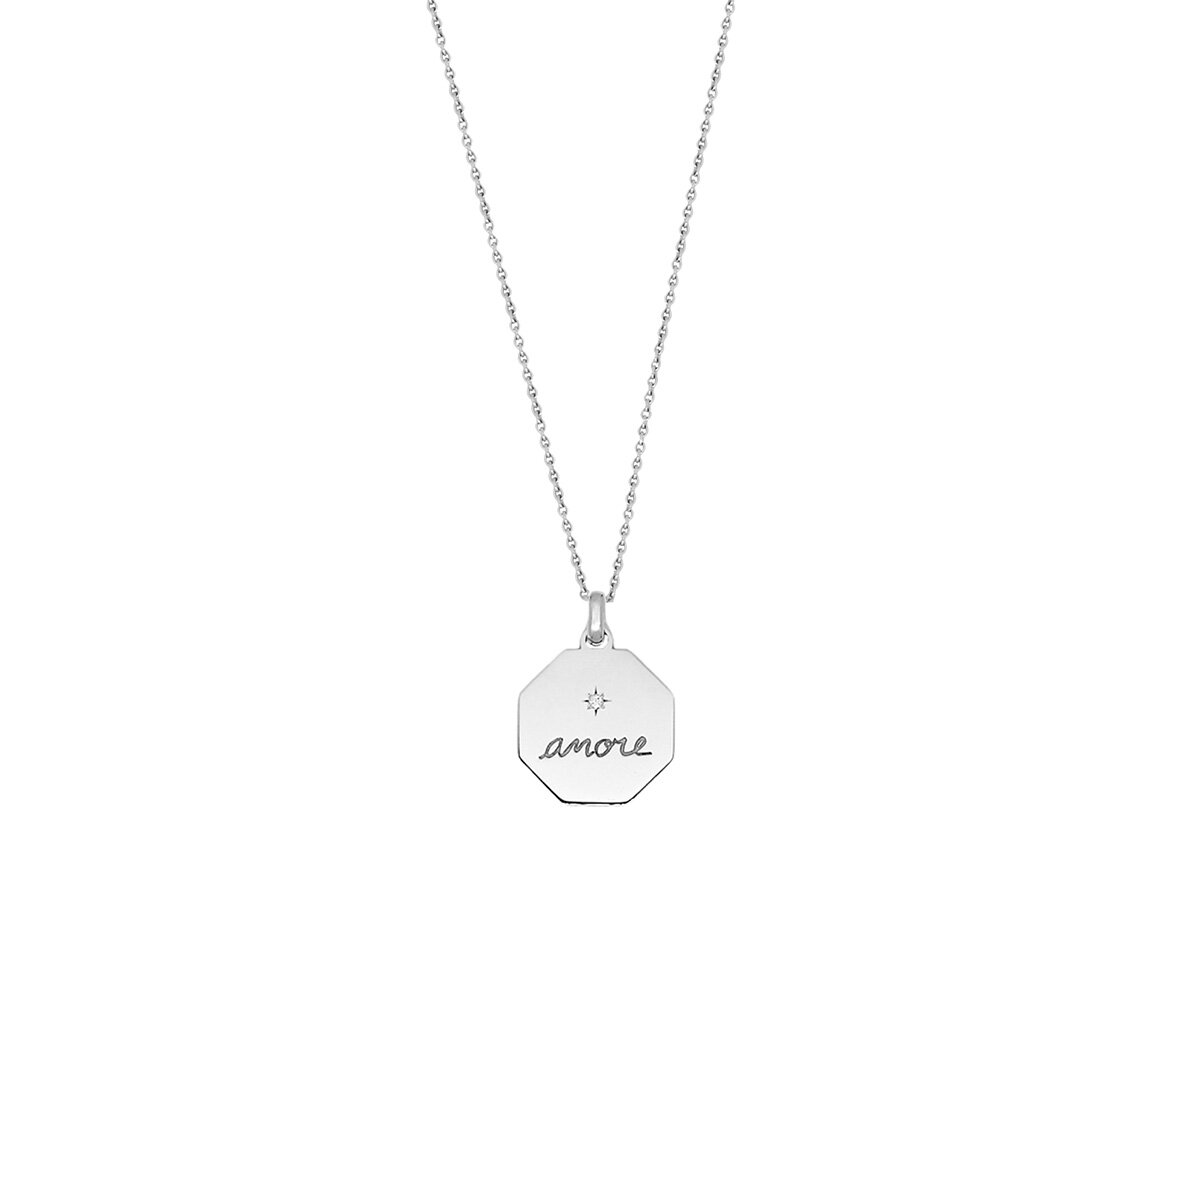 Poinçon22-médaille-amore-or-blanc-18-carats-1200x1200.jpg